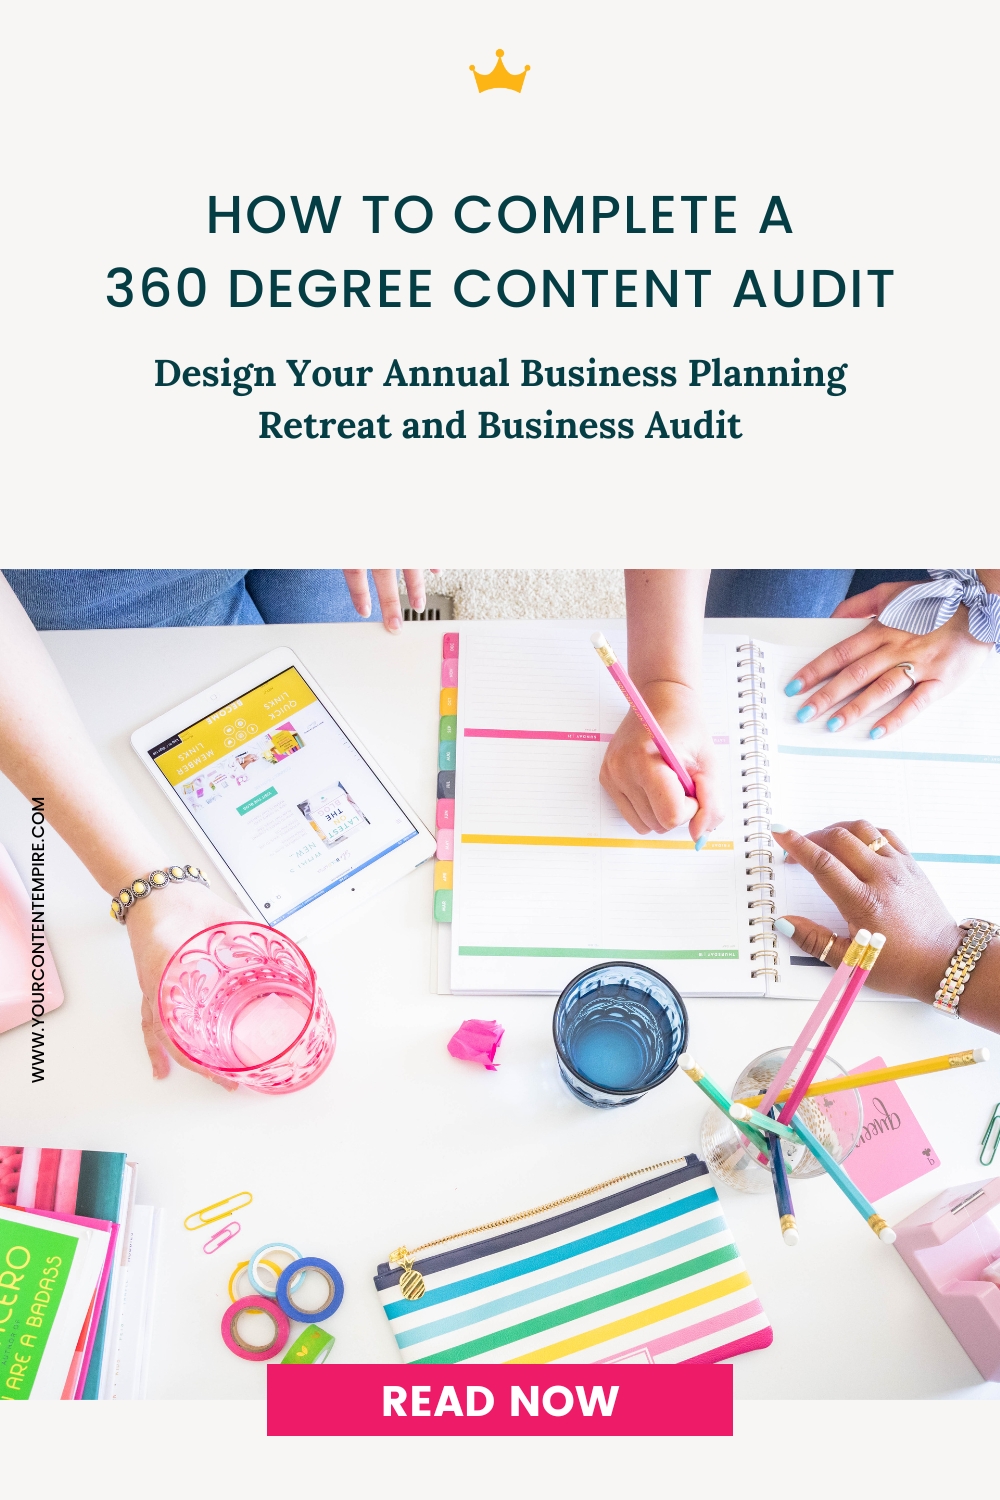 How to Complete a 360 Degree Content Audit